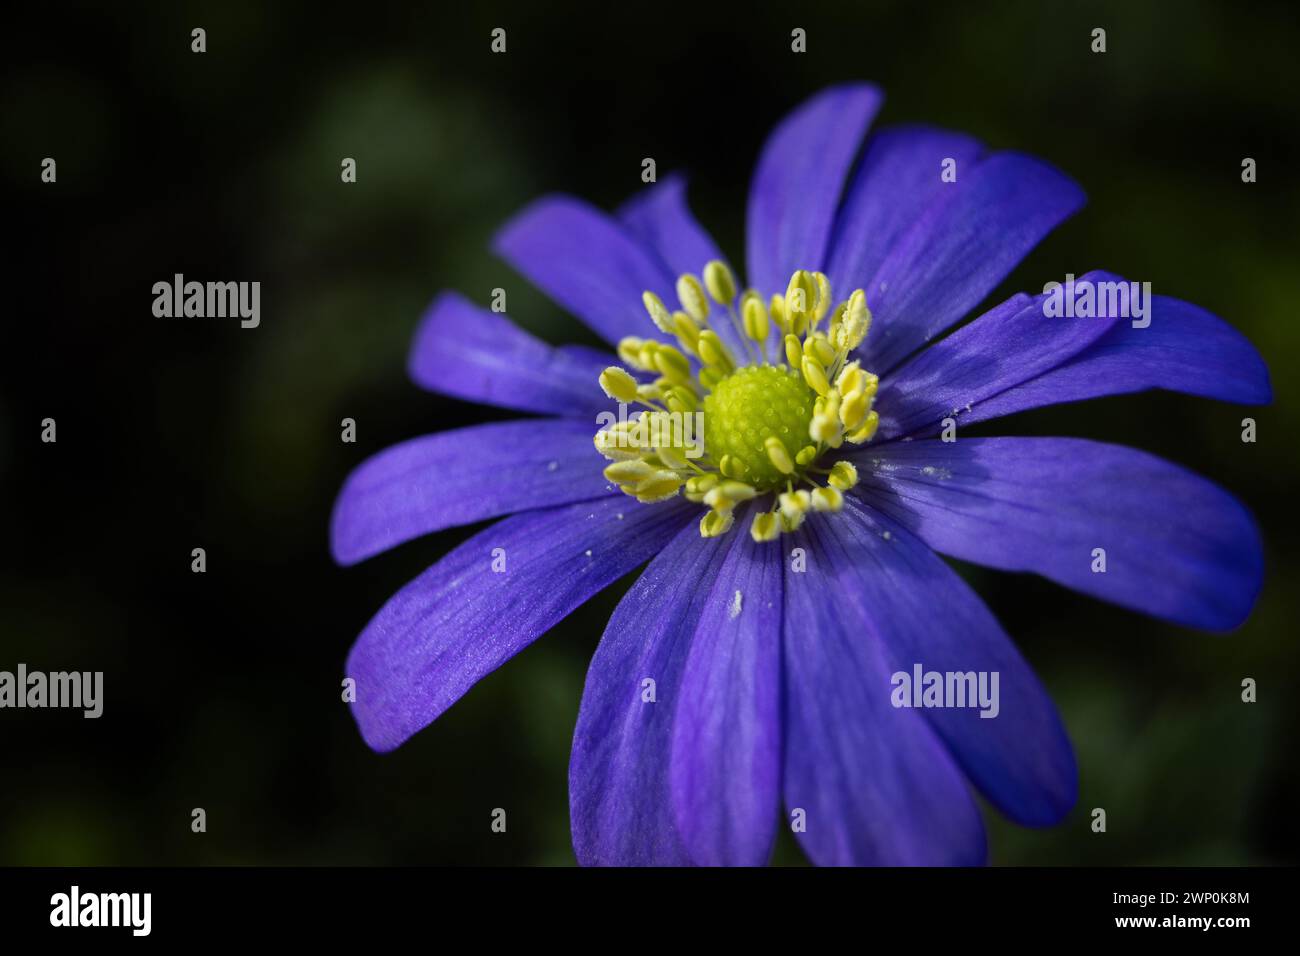 Close up image of the beautiful purple of an Anemone blanda flower also known as Grecian windflower or Balkan anemone. Copy space to left. Stock Photo